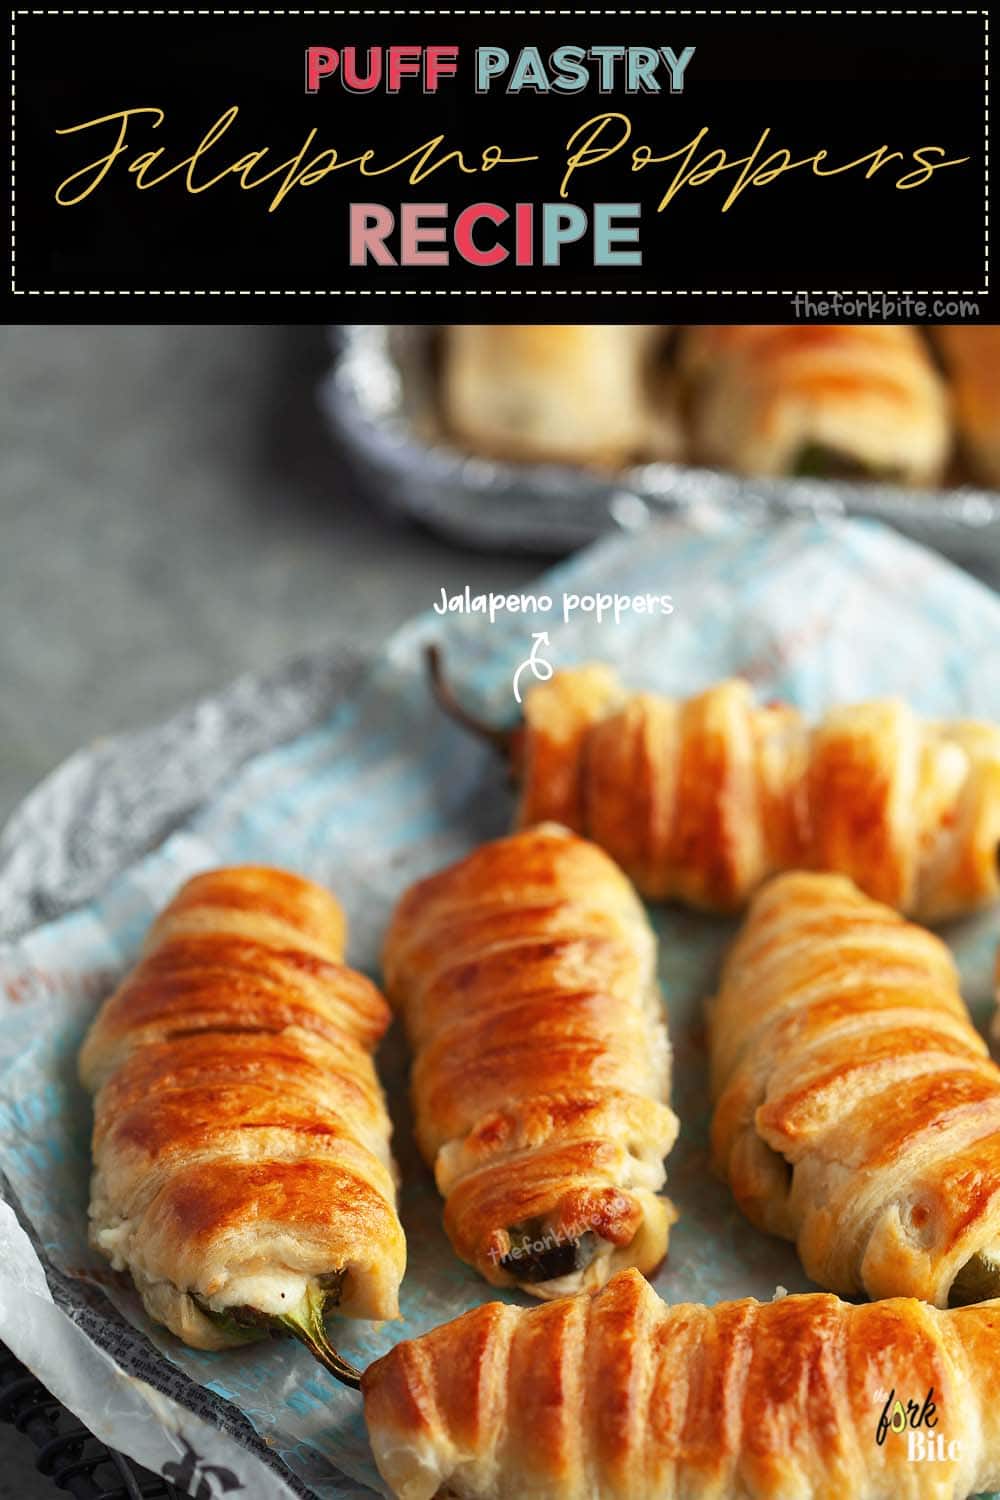 Imagine cream cheese, shredded cheese, hot Jalapenos, and delicious bacon in one crispy parcel.